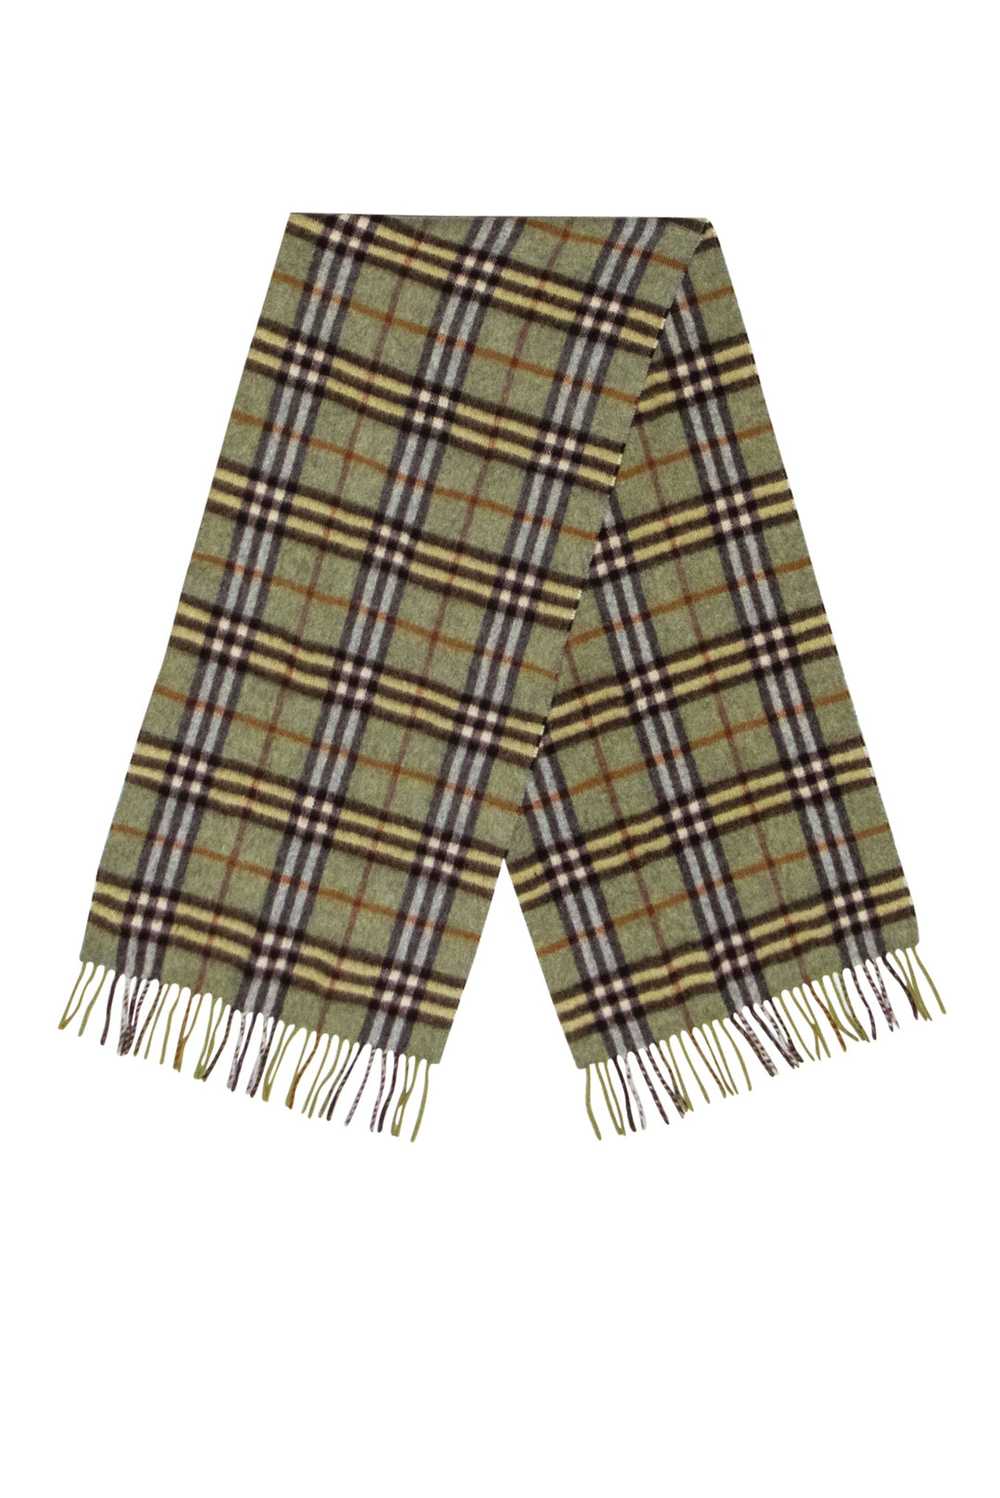 Burberry - Green & Brown Plaid Cashmere Scarf - image 1